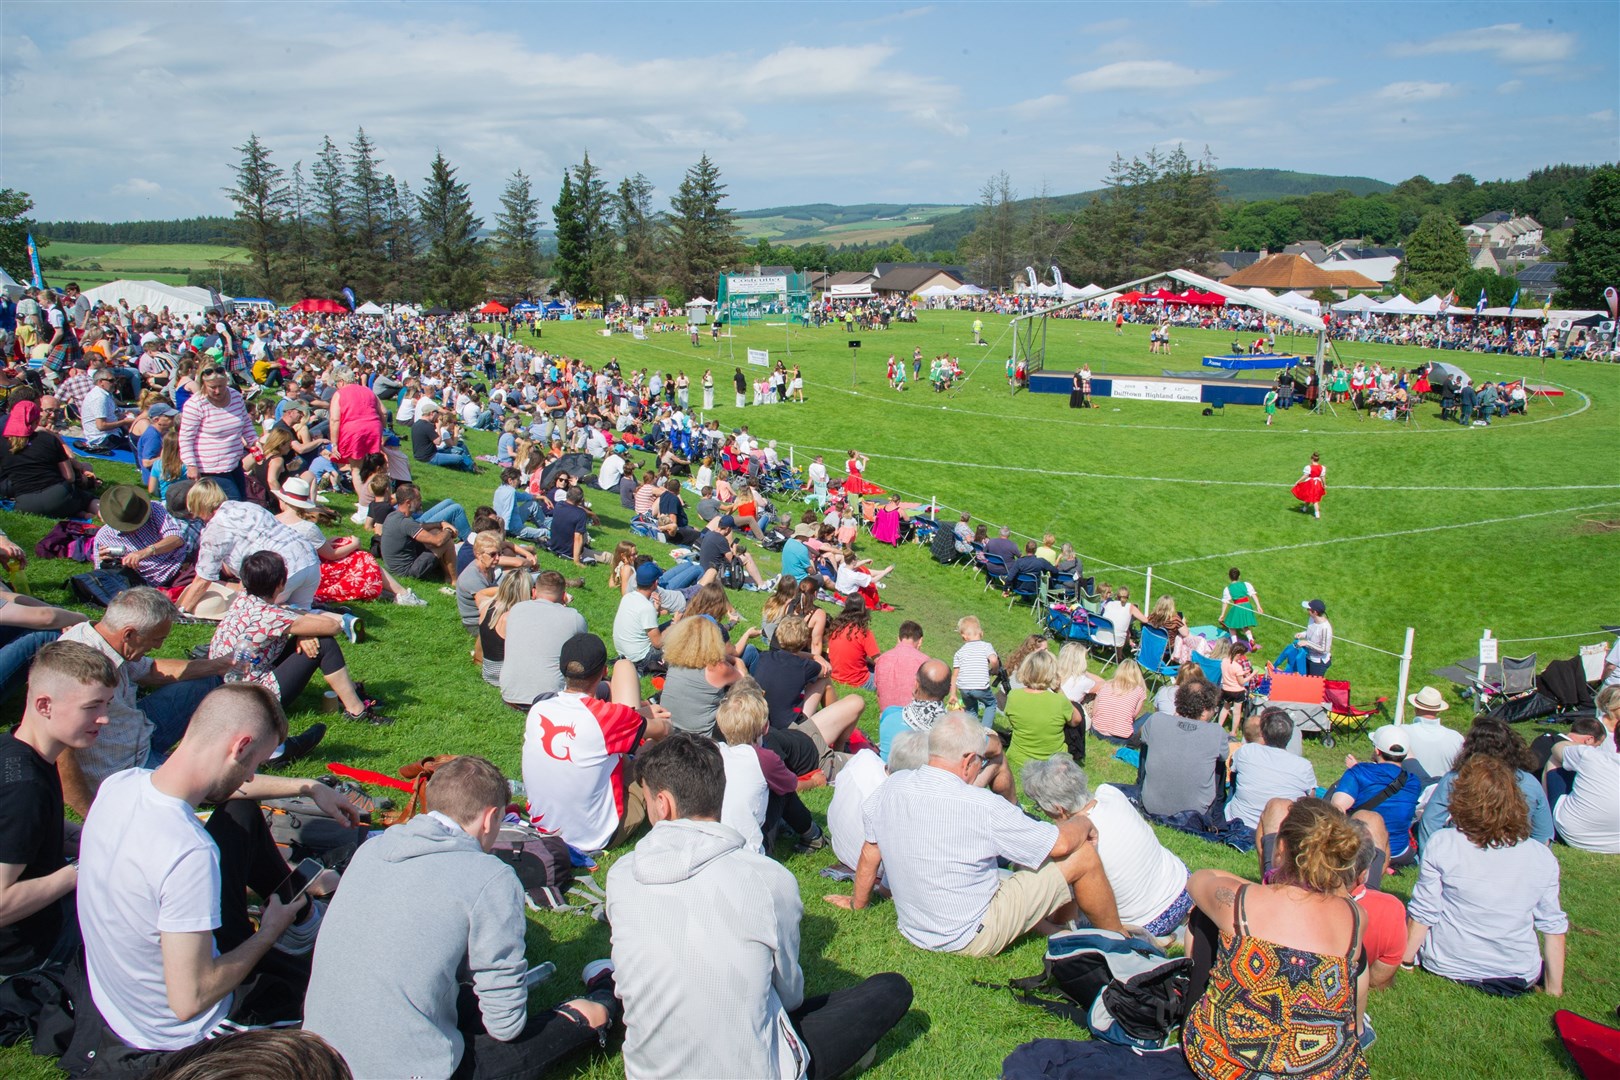 The Mortlach school field is packed as the sun shines on the Dufftown Highland Games. All pictures: Daniel Forsyth. Image No.044535.